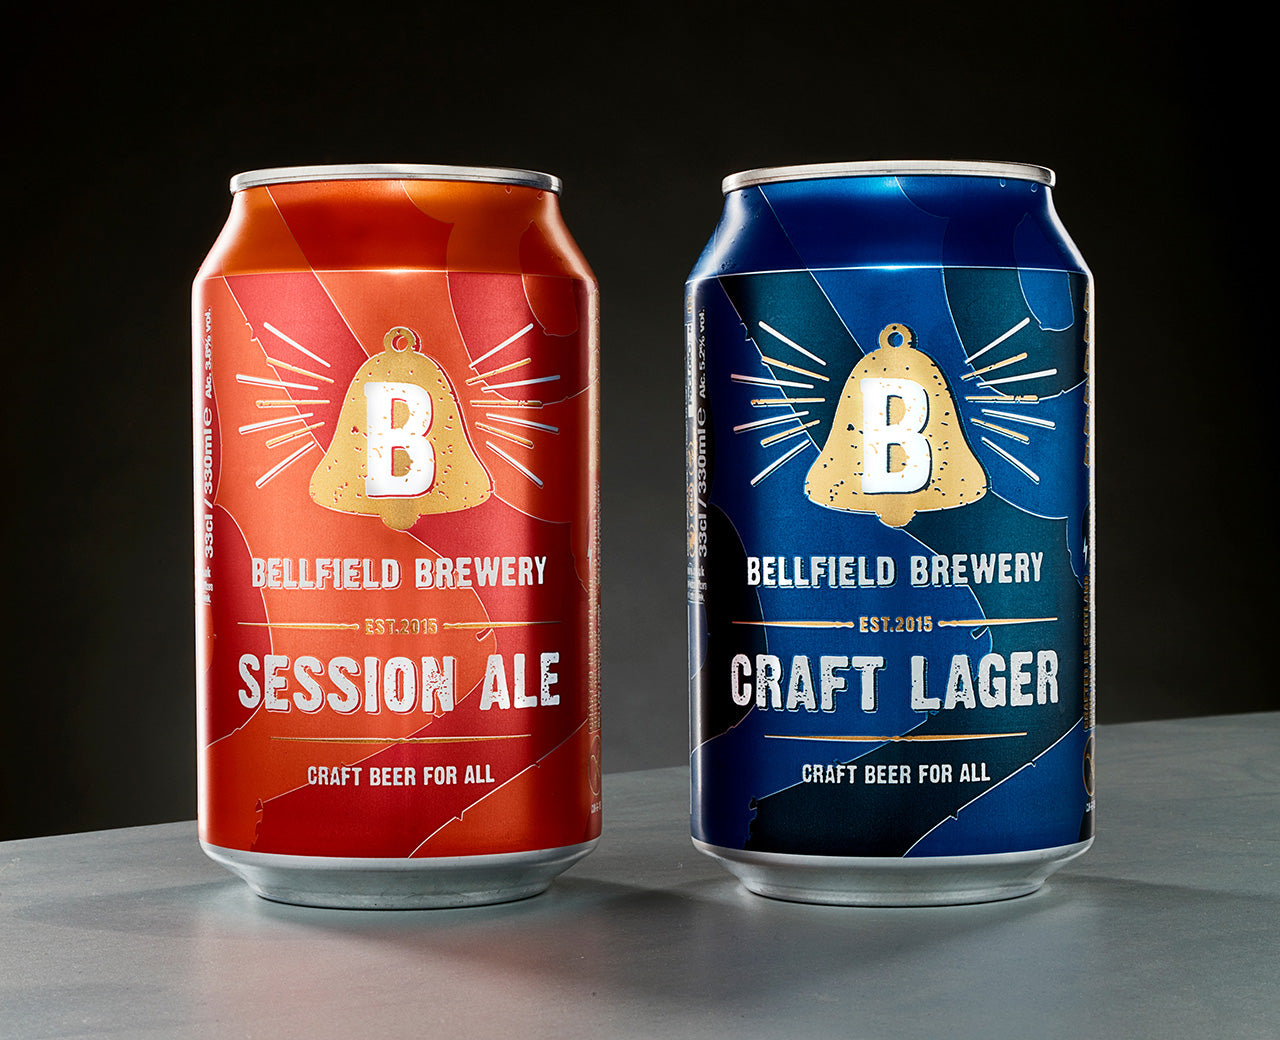 New beers out now in cans: Session Ale and Craft Lager